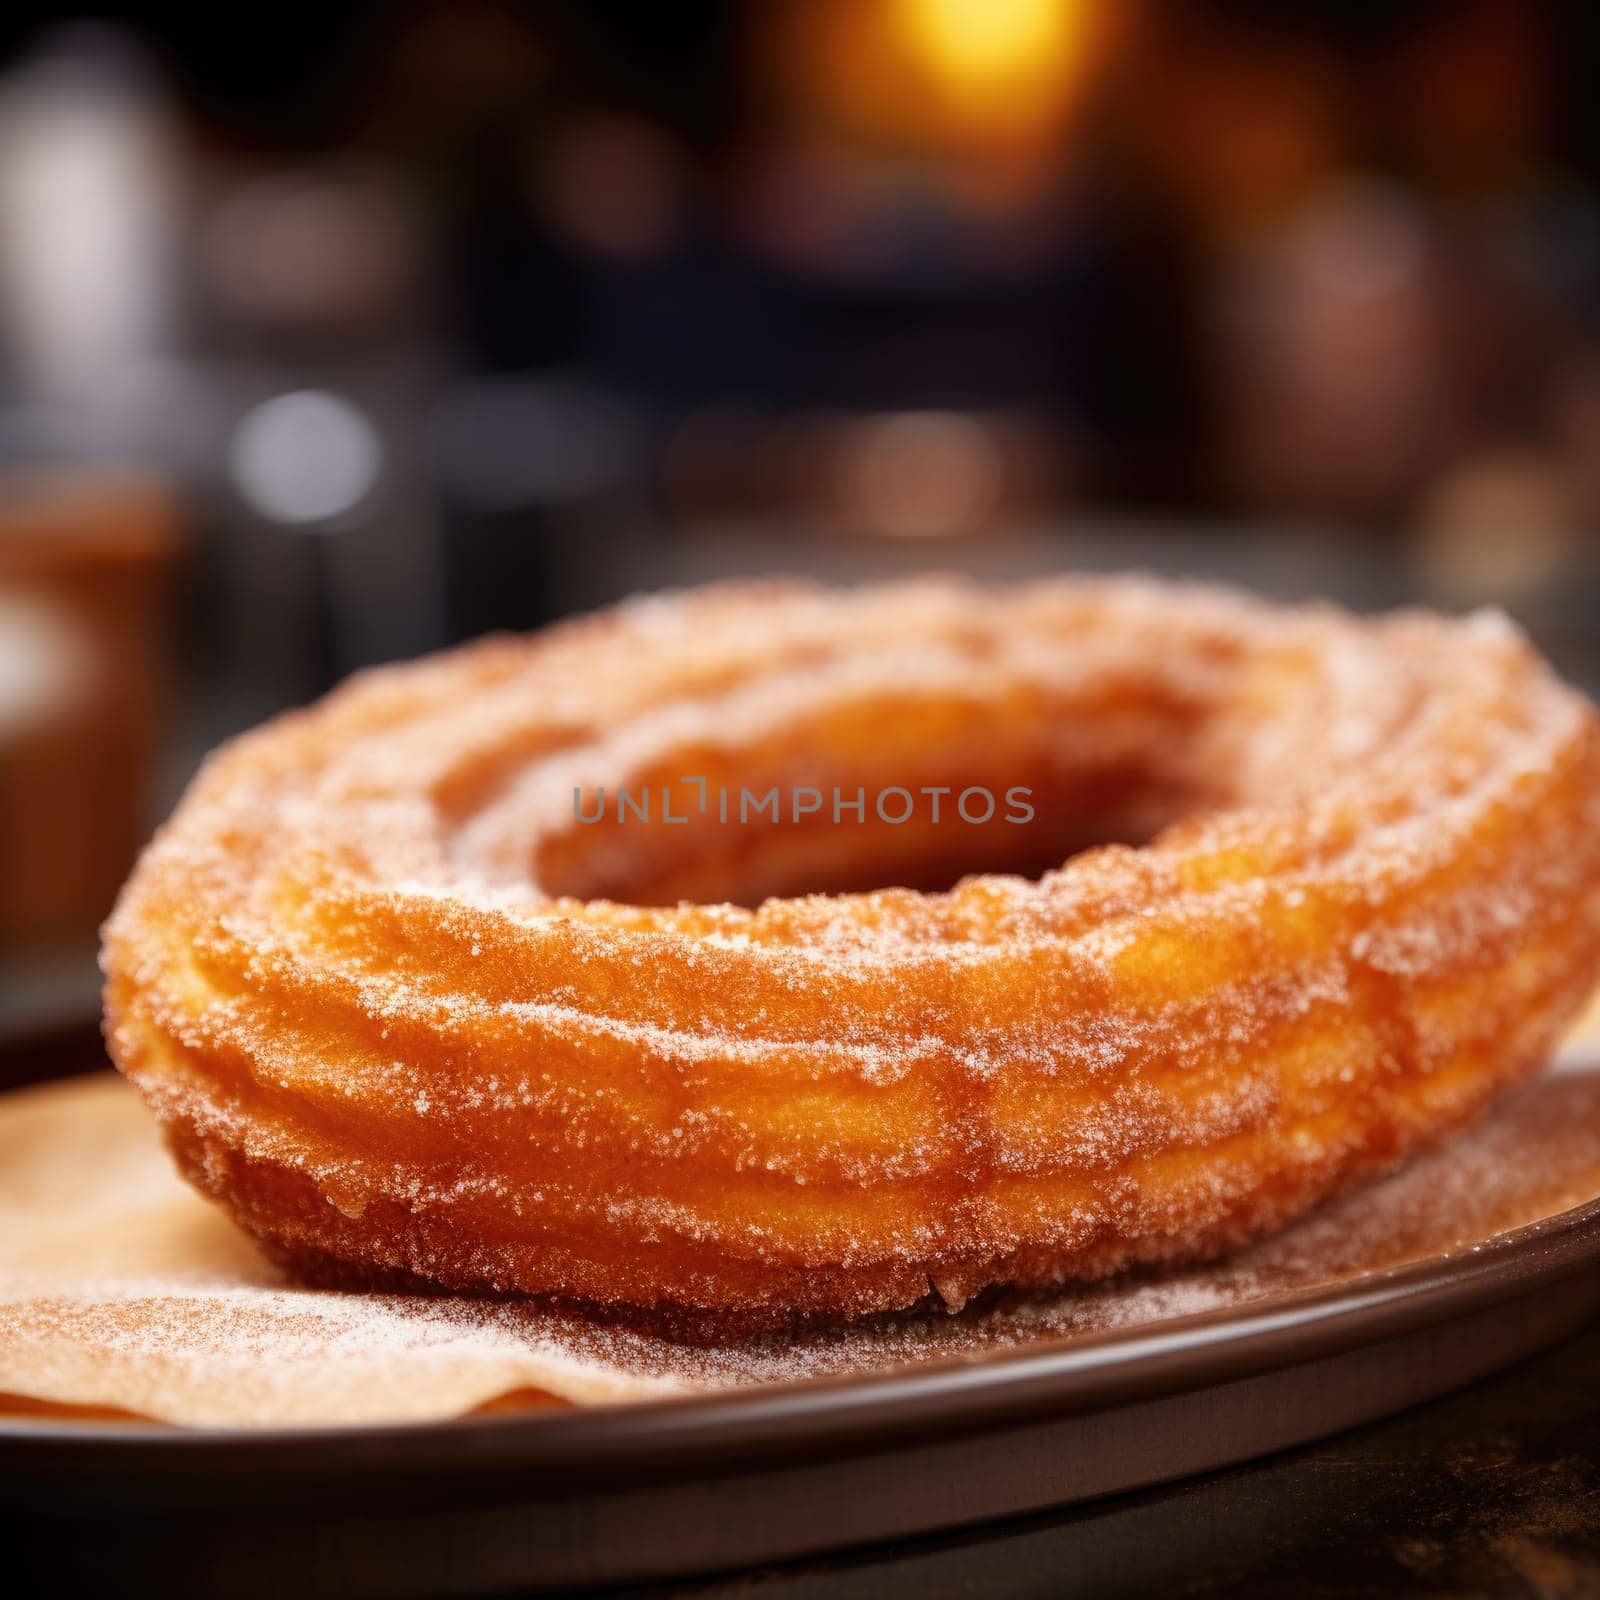 A churro on a plate with a drink in the background